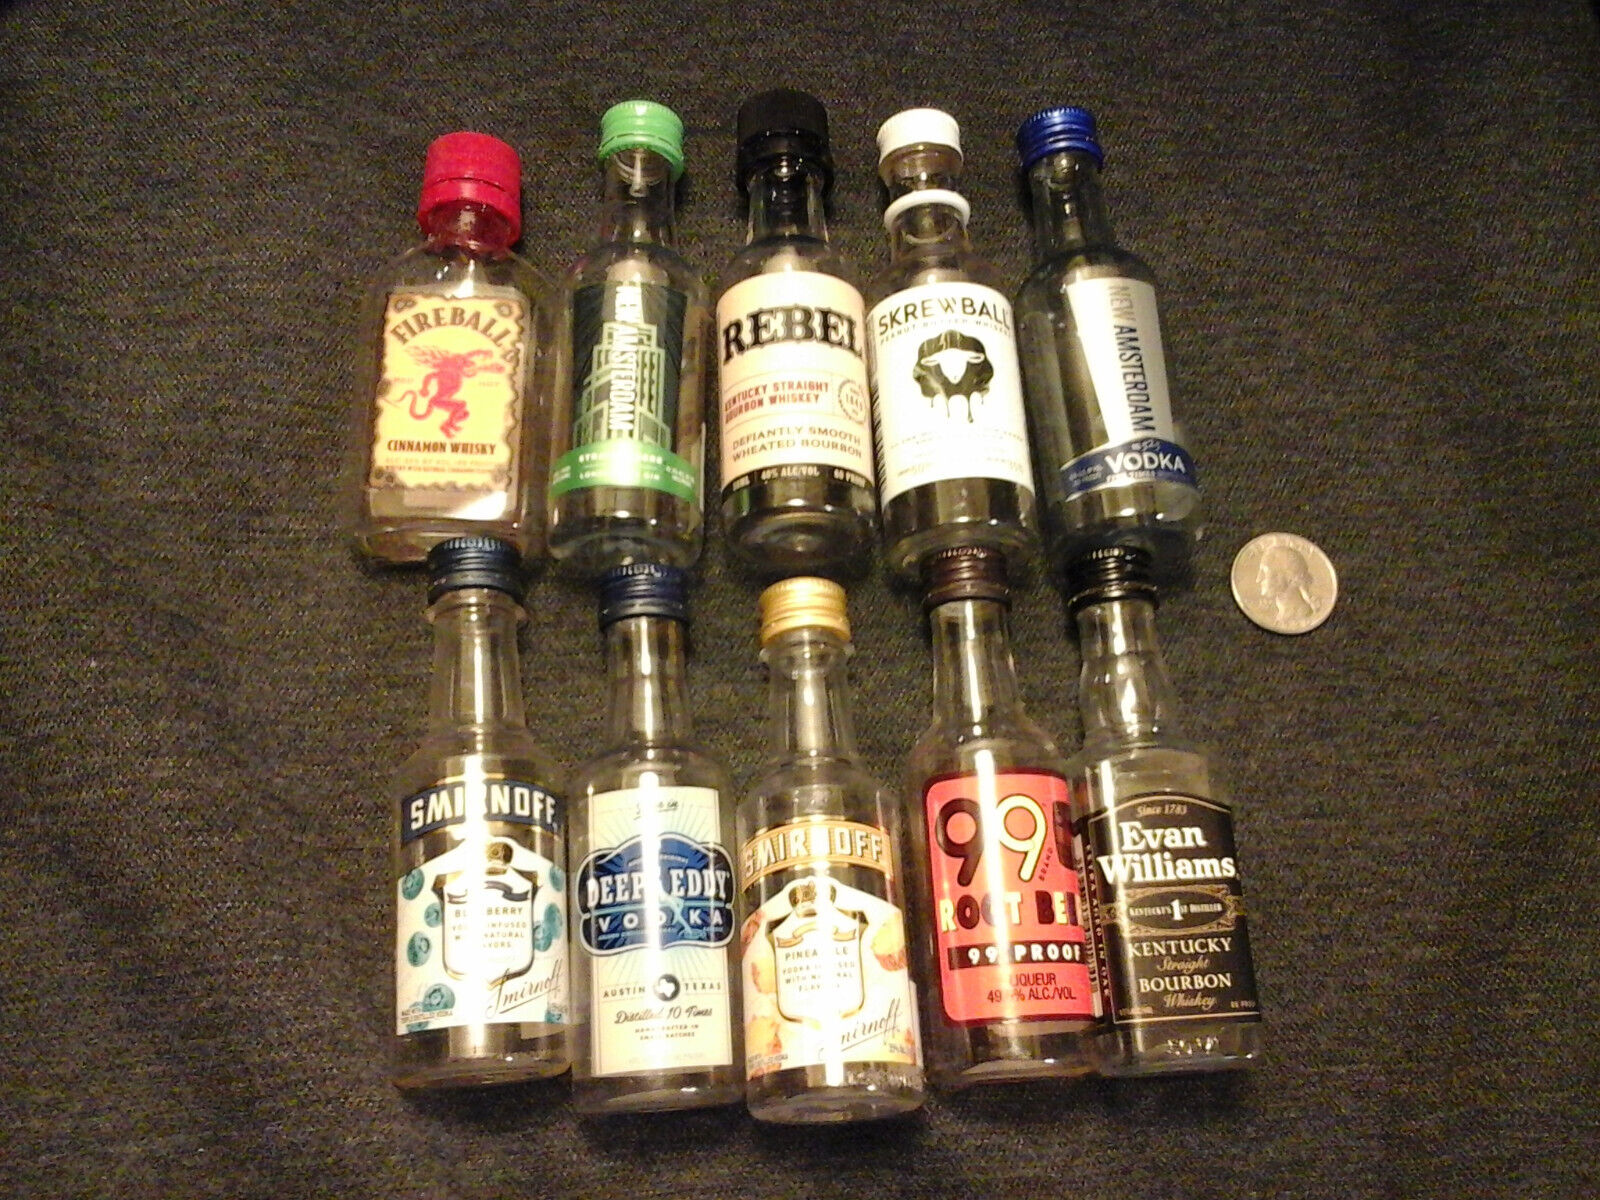 LOT OF 10 Random Picked ASSORTED EMPTY 50ml LIQUOR BOTTLES. Some are glass